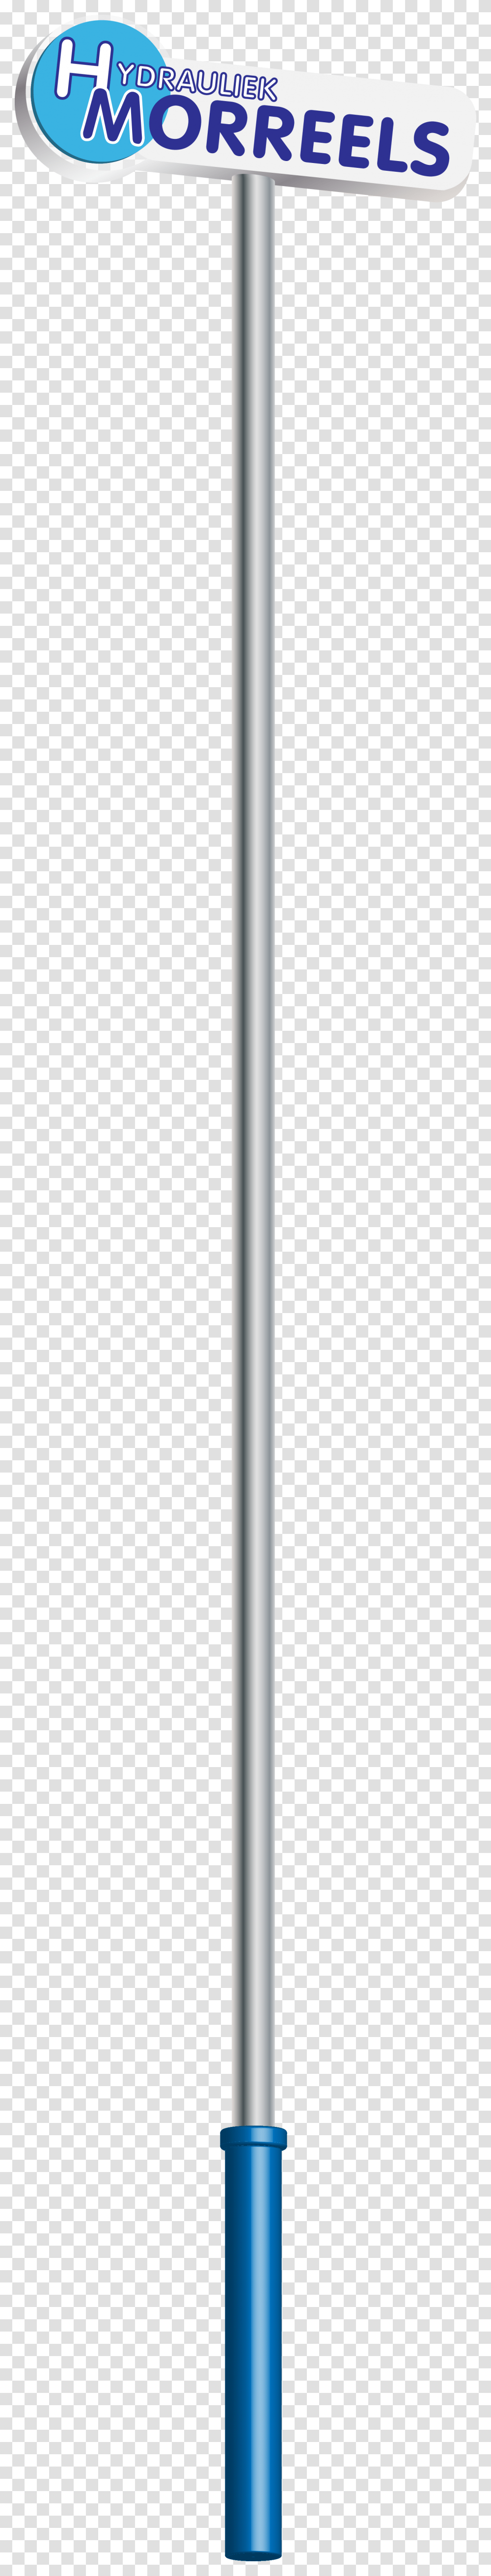 Smartphone, Oars, Lamp Post, Paddle Transparent Png